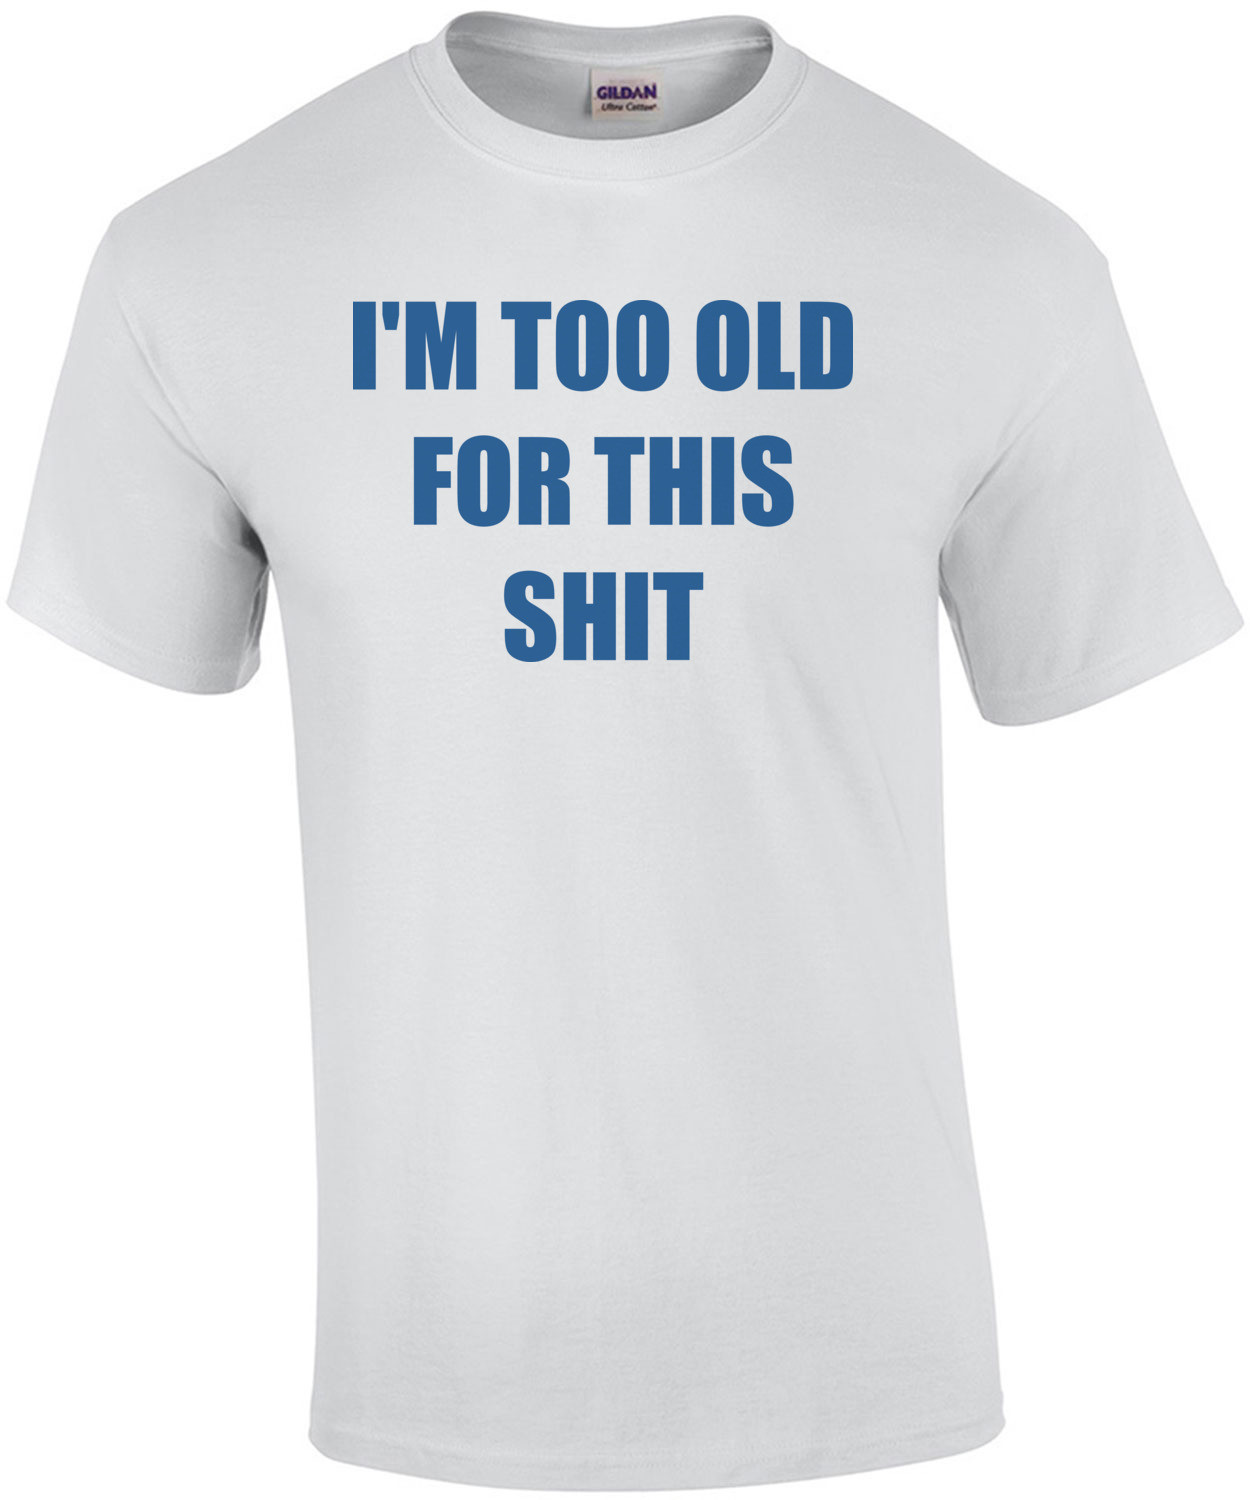 I'M TOO OLD FOR THIS SHIT Funny Shirt